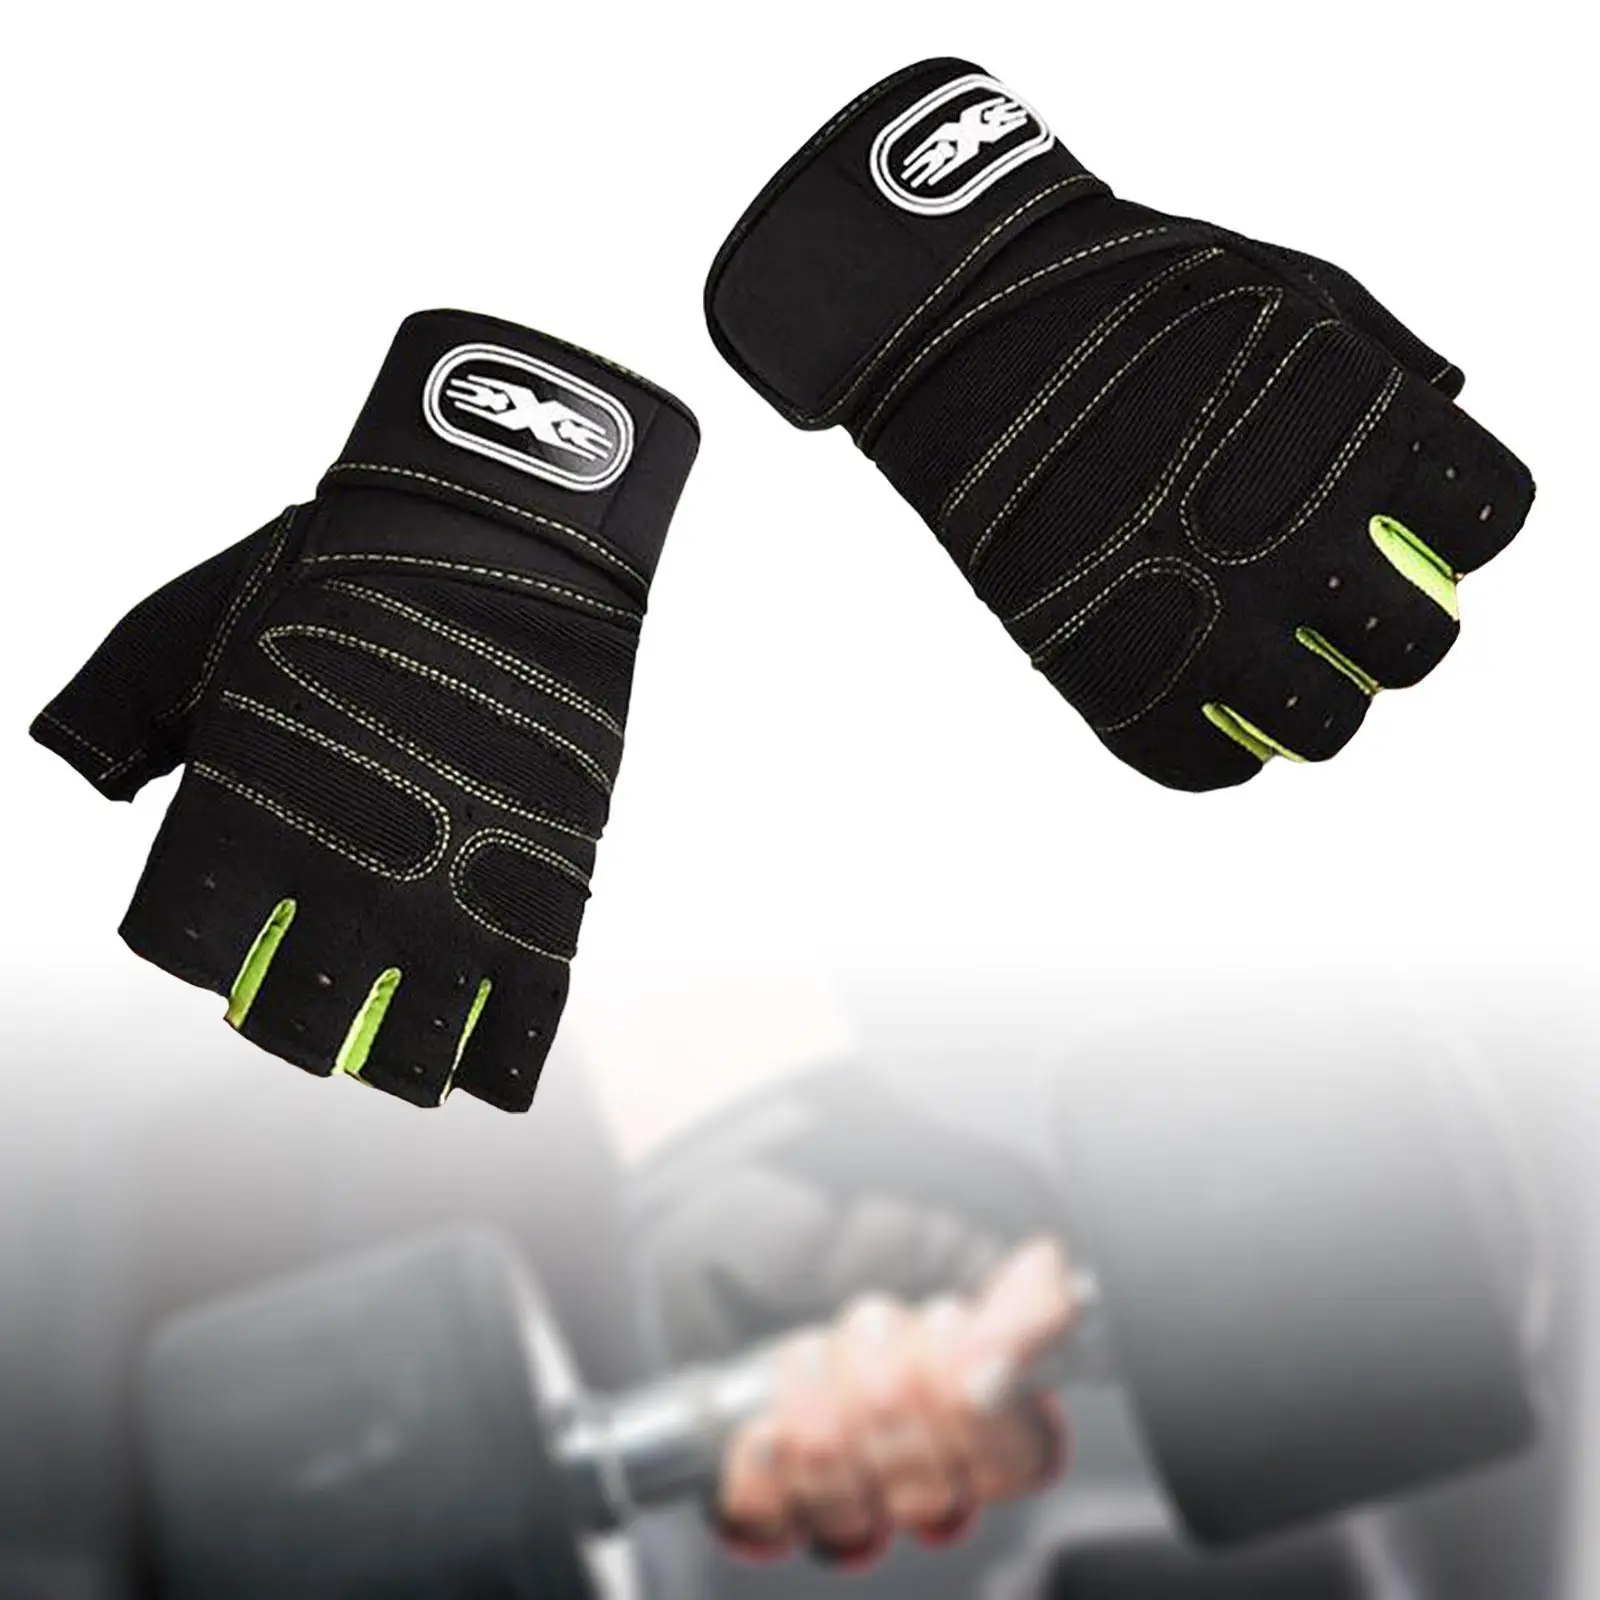 Gym Gloves Nonslip Wrist Support Knit Pads Lightweight Weight Lifting Gloves for Bodybuilding Training Pull Ups Cycling Workout